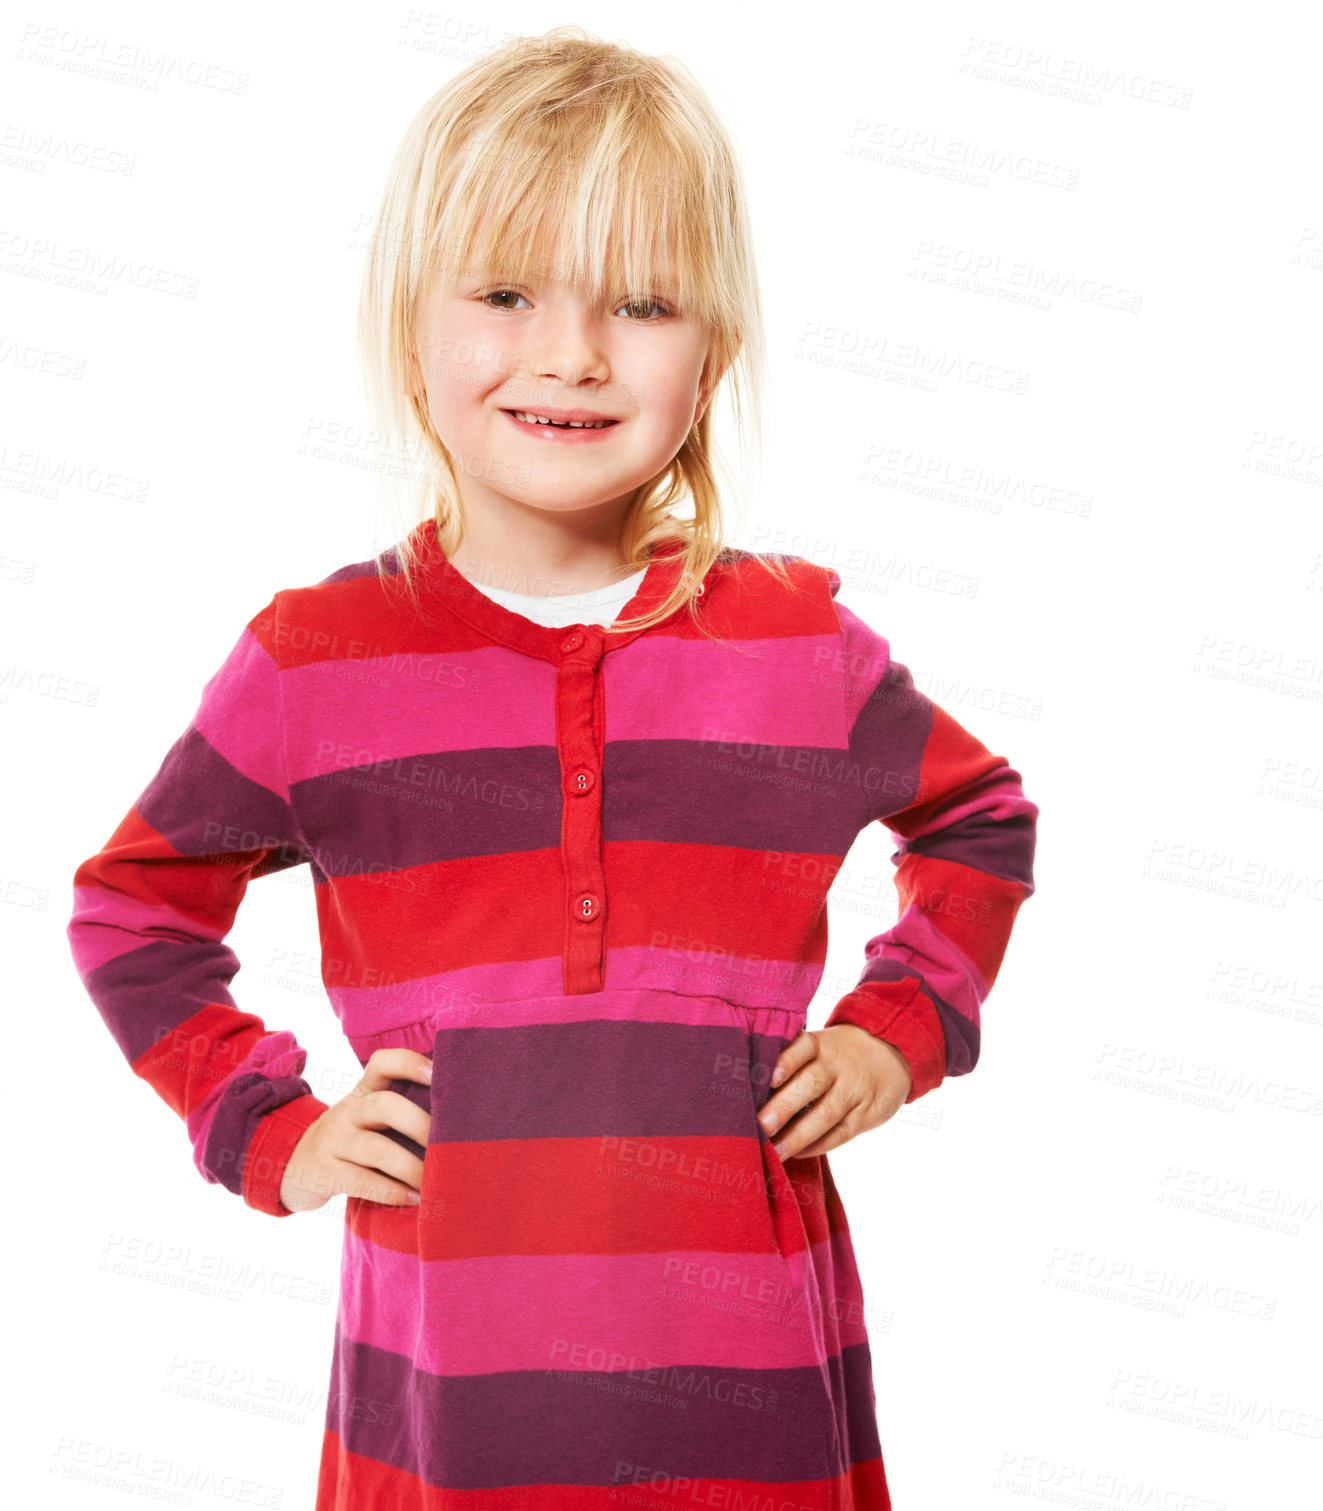 Buy stock photo A cute little blonde girl smiling while standing with her hands on her hips